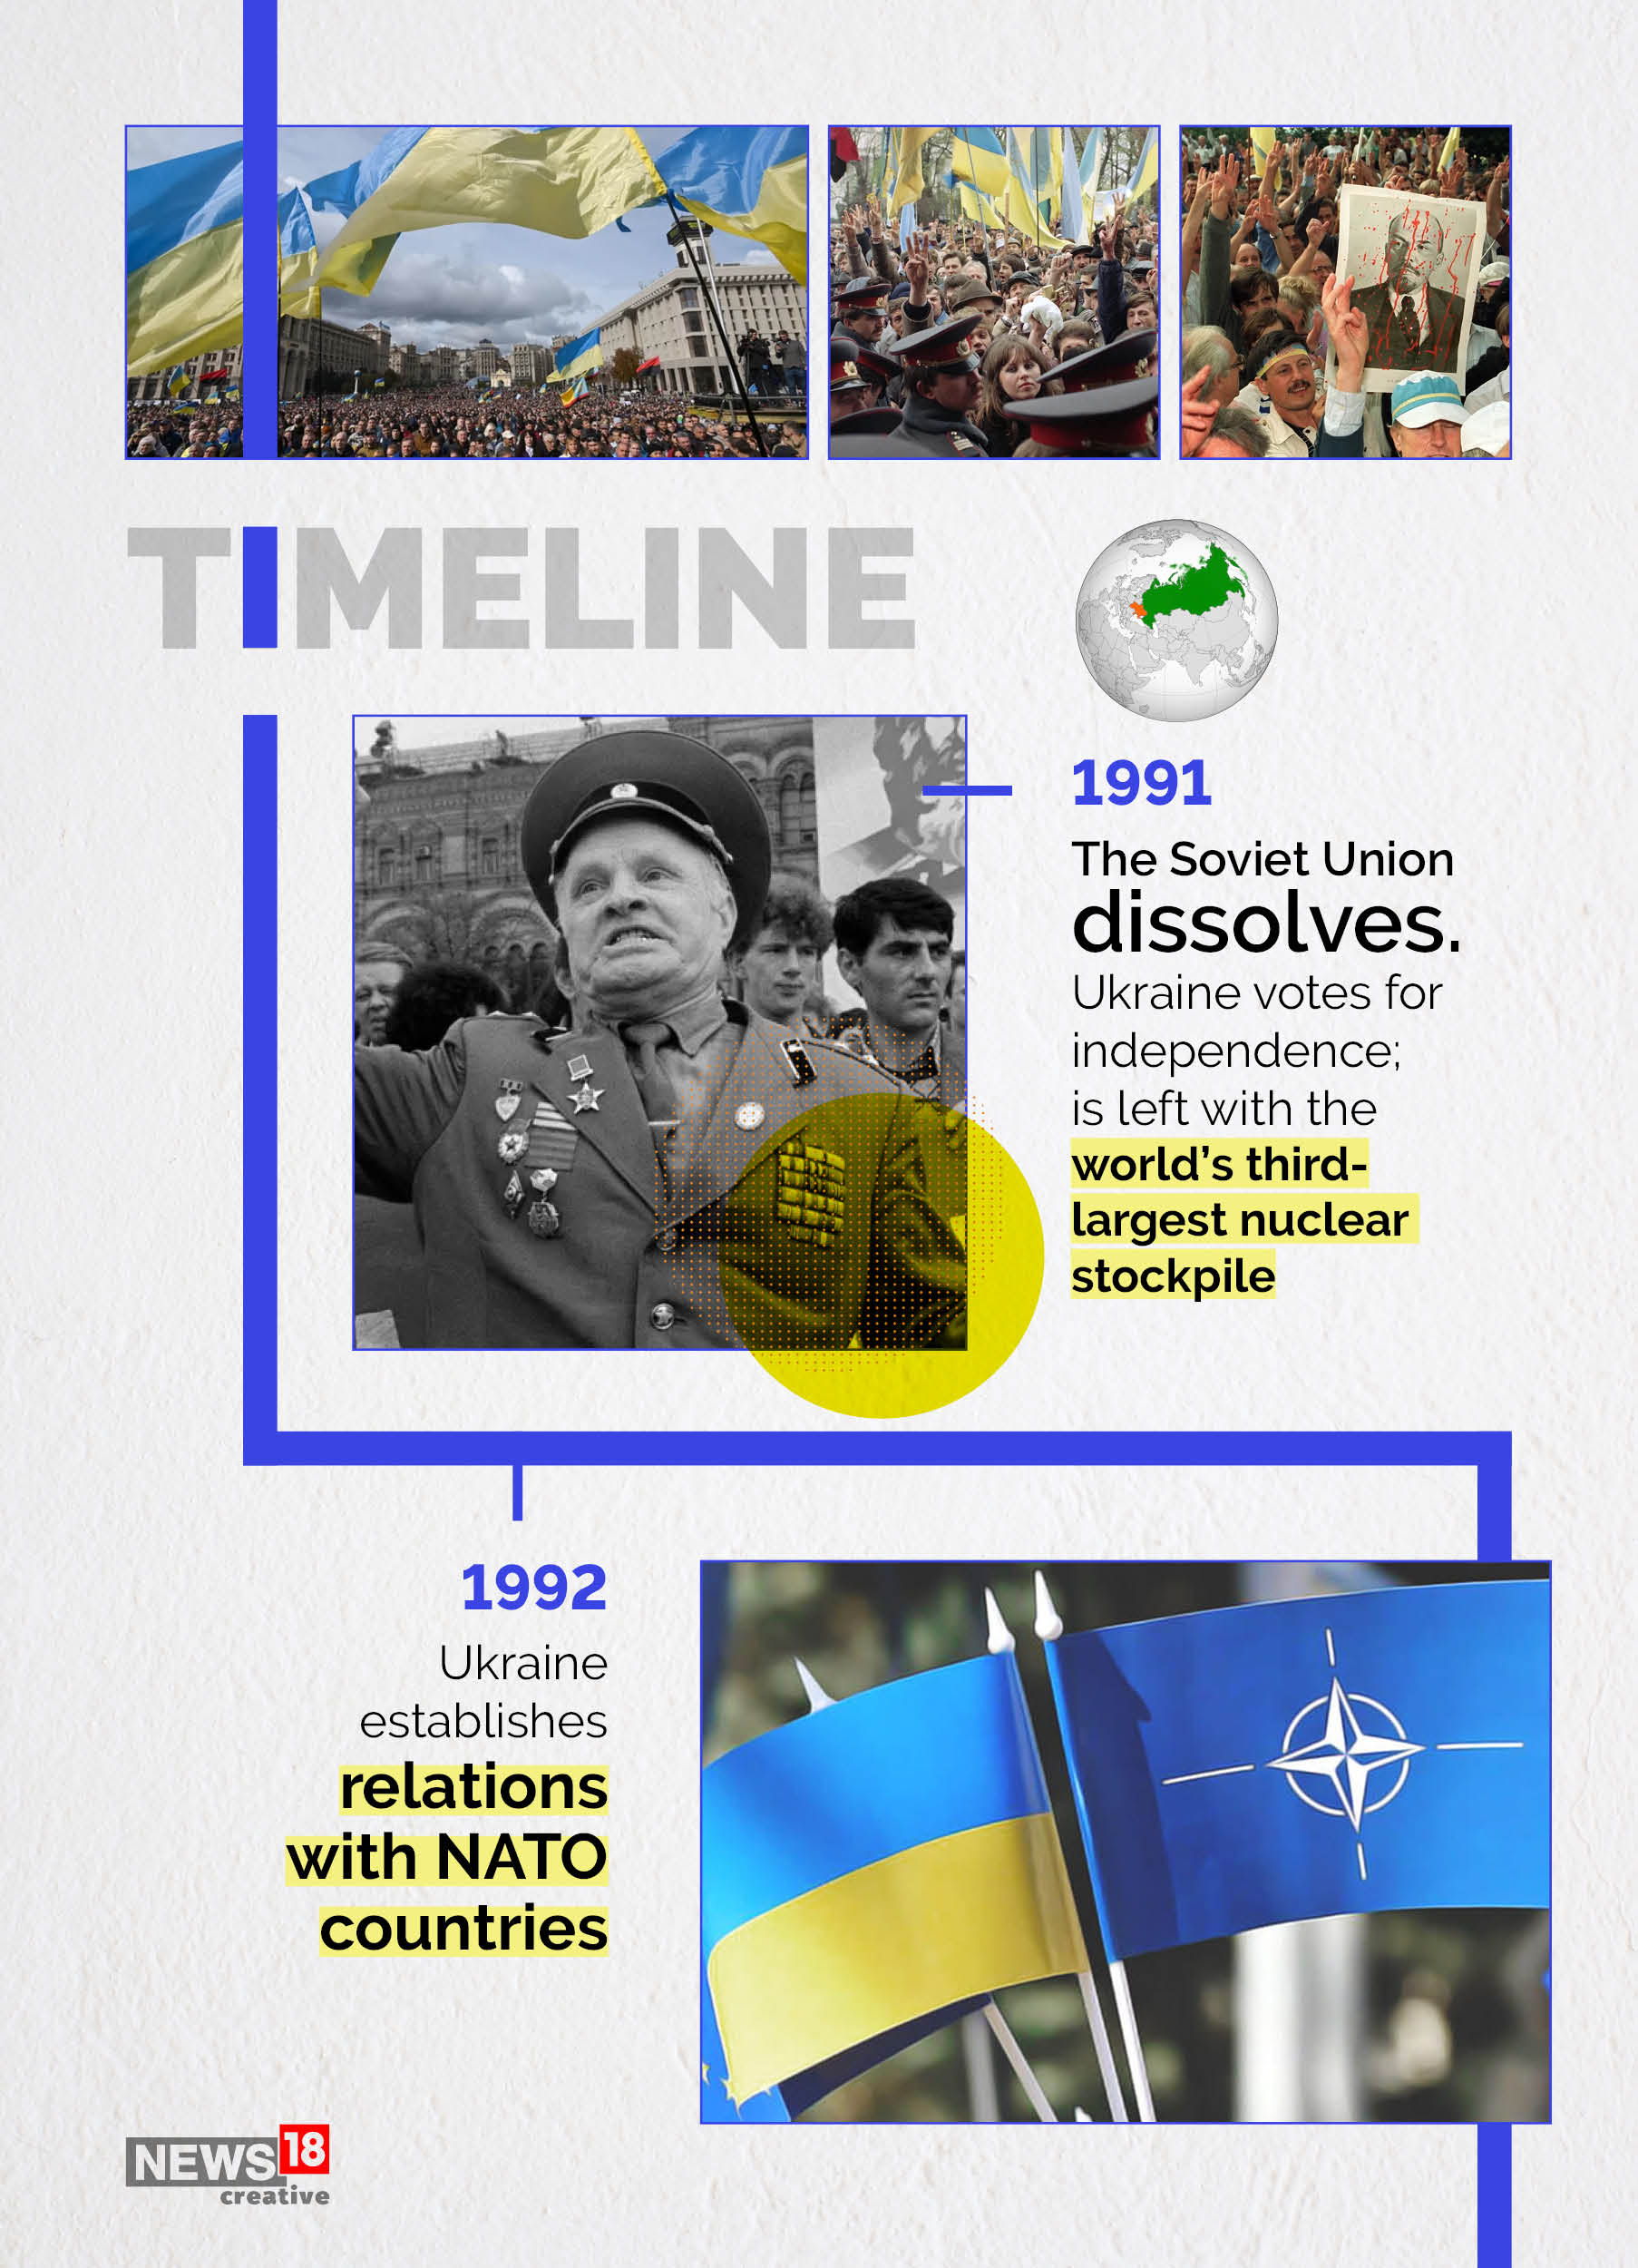 Timeline: 30 years and pivotal events that led to Russia's Ukraine invasion